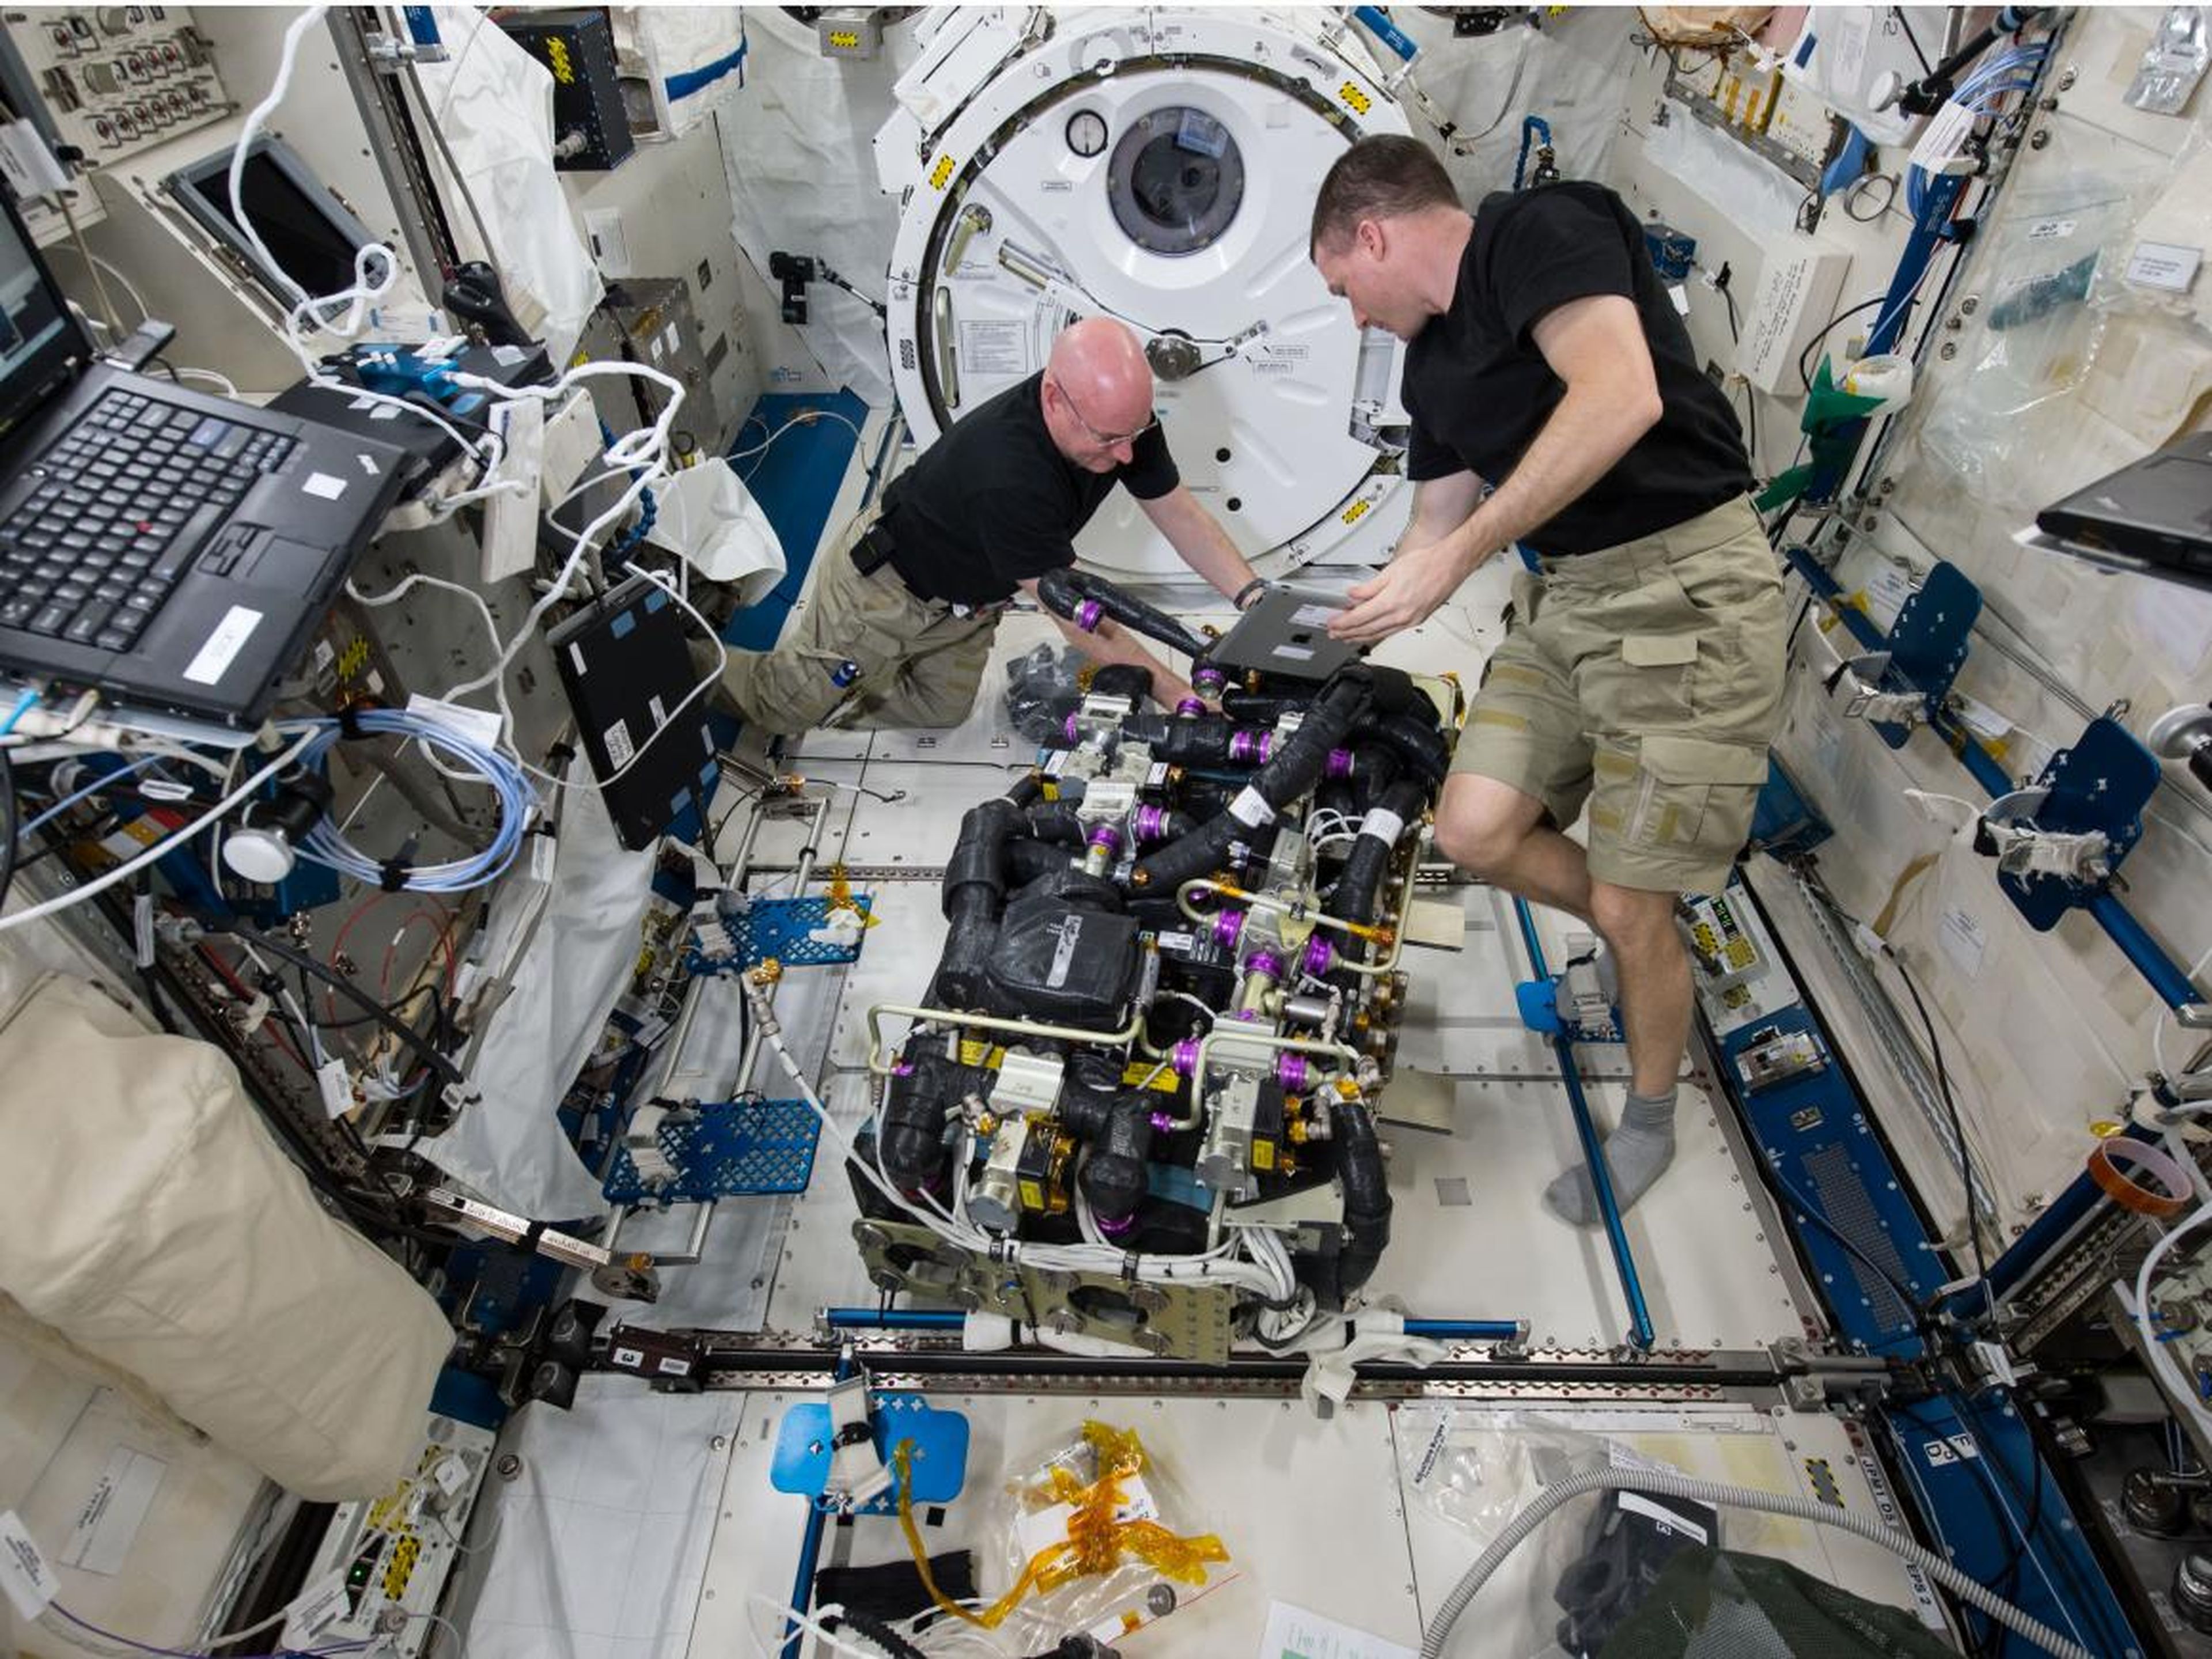 NASA astronauts Scott Kelly (left) and Terry Virts (right) work on a Carbon Dioxide Removal Assembly inside the station's Japanese Experiment Module.